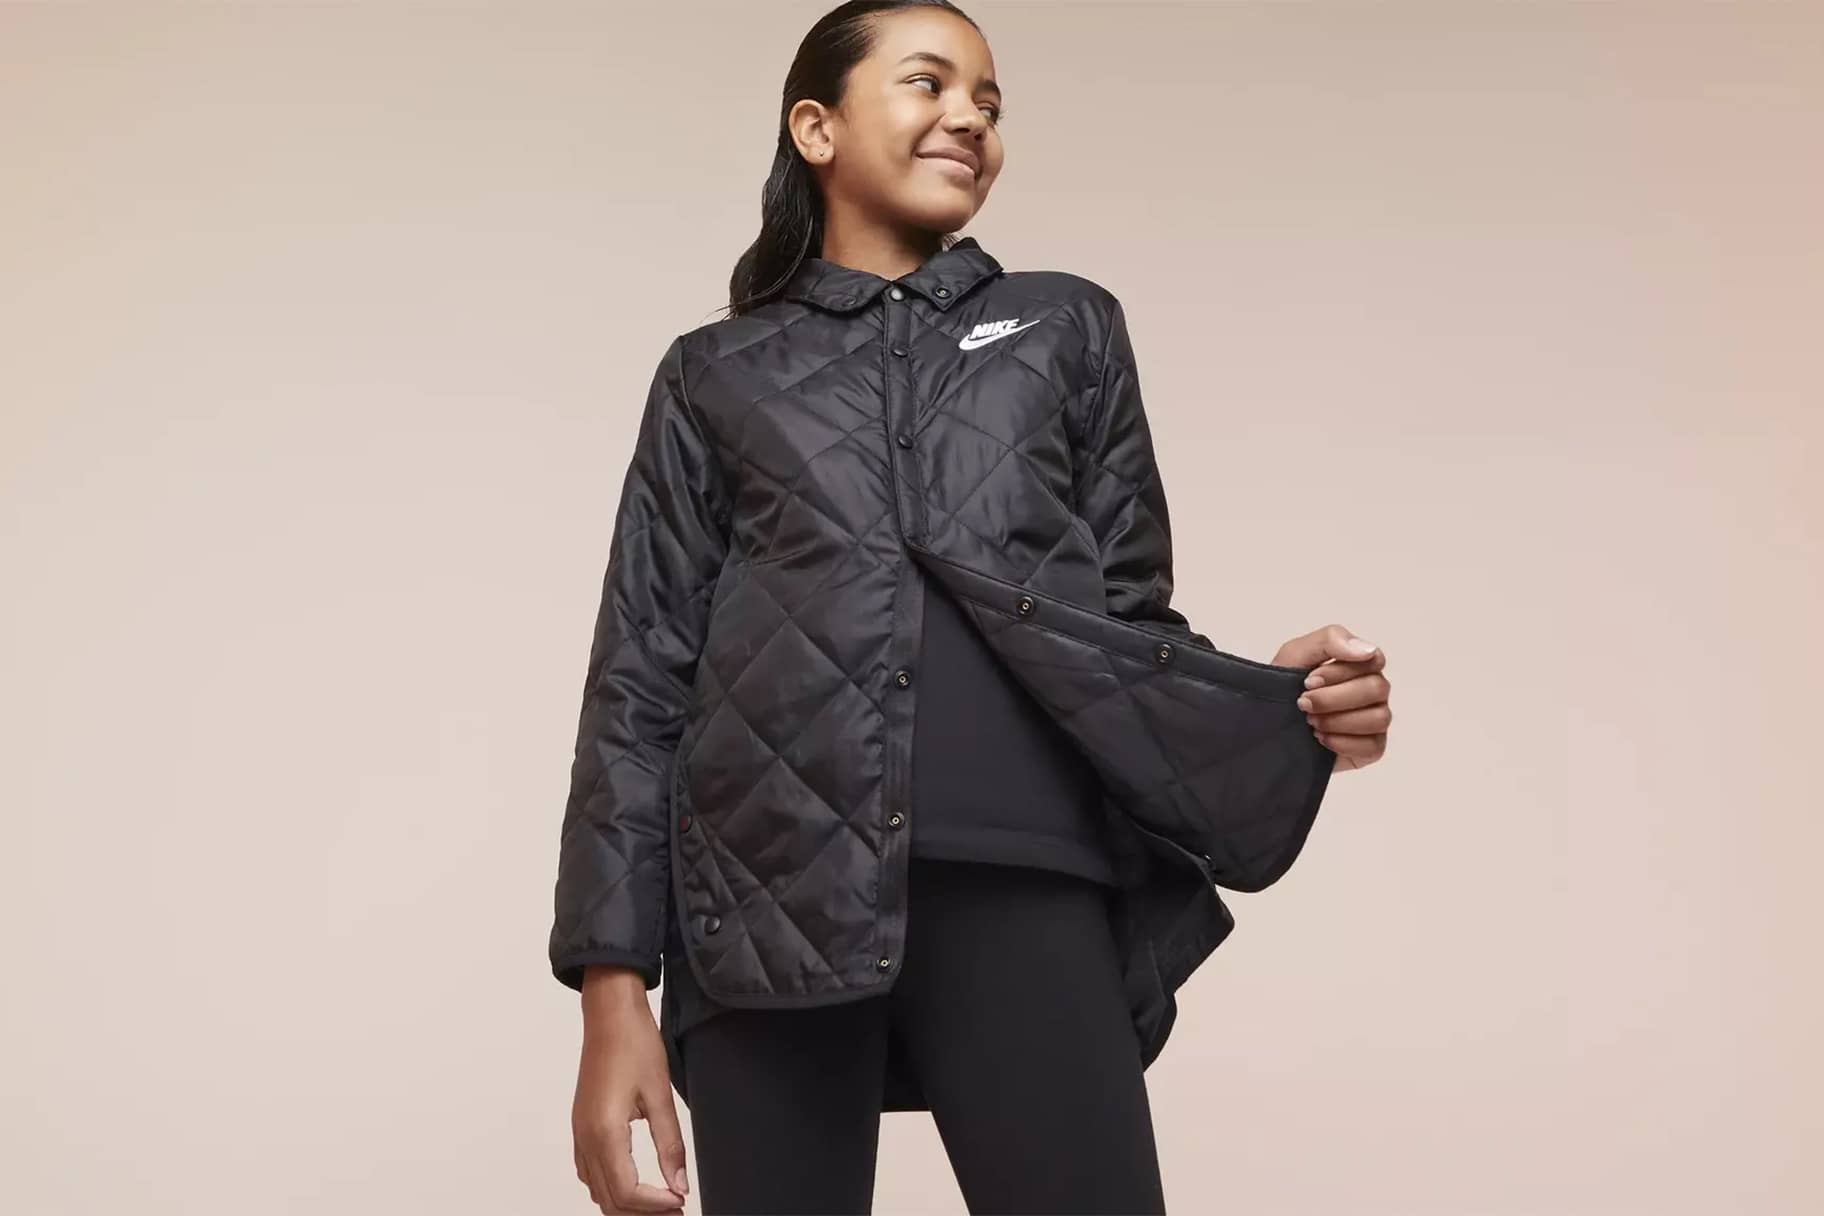 The Best Nike Jackets for Kids